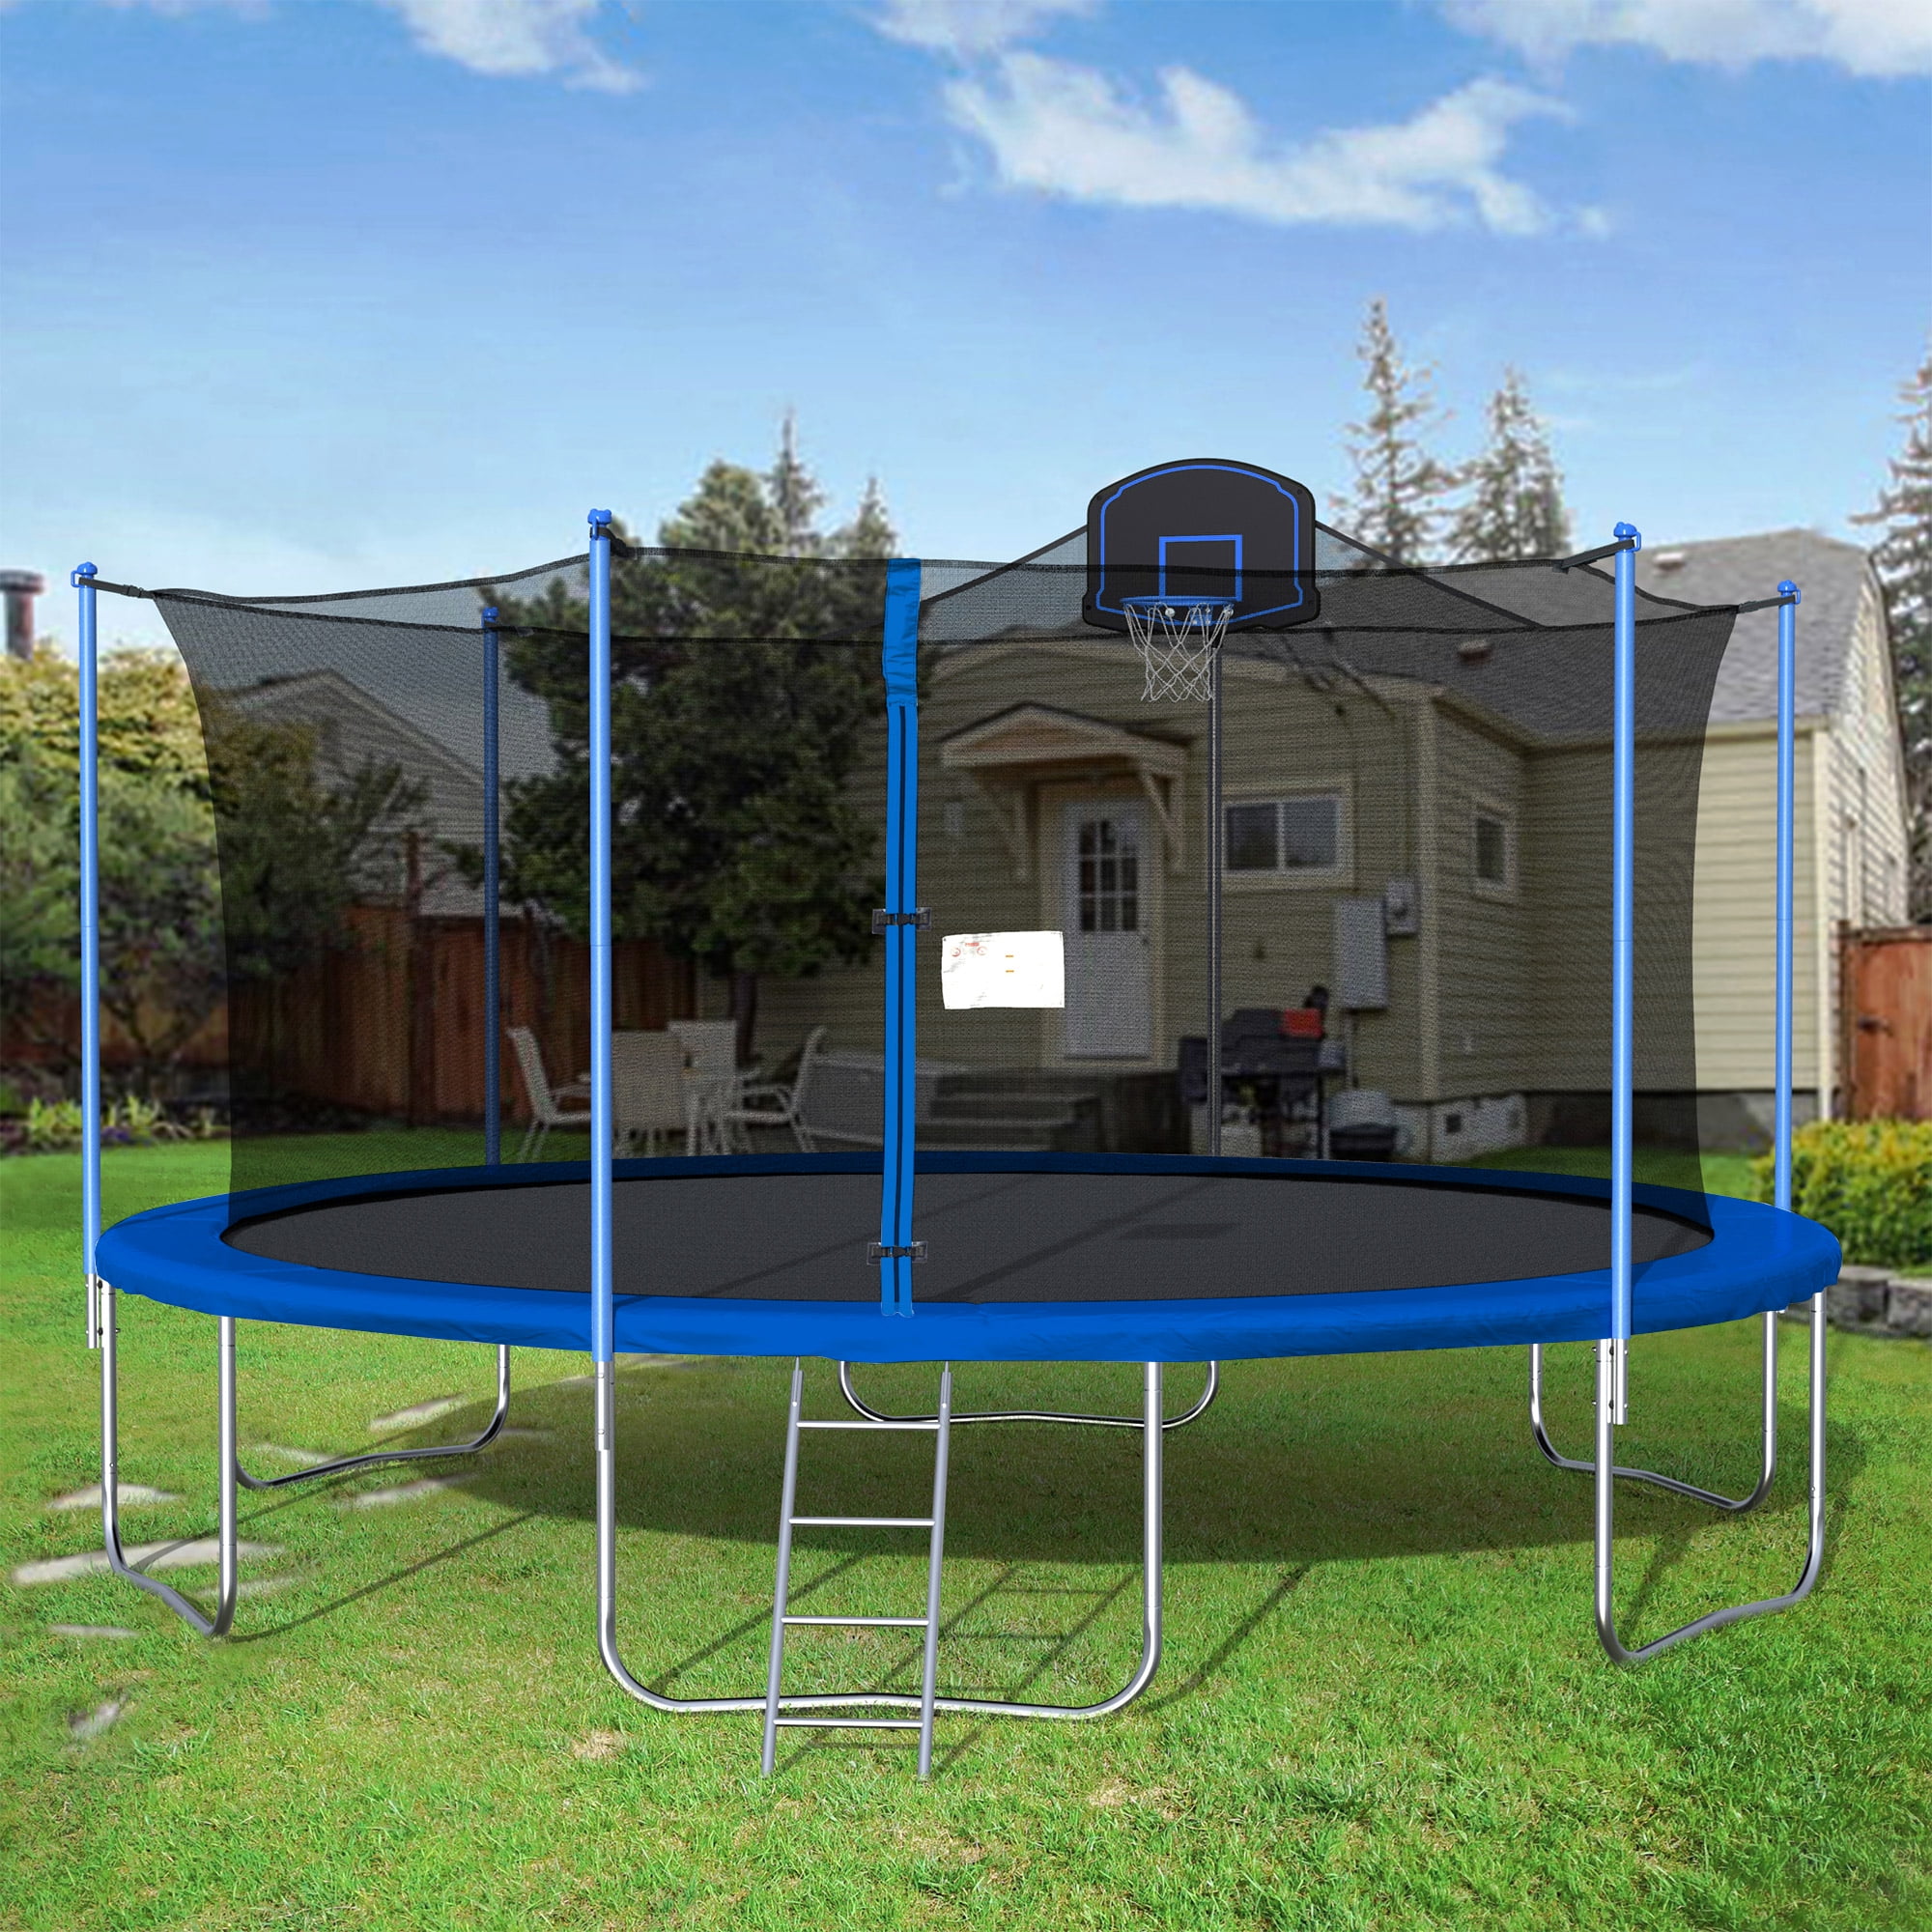 Capacity for 10 Kids Basketball Hoop and Ball LHX 1500LBS Tranpoline for Adults Spring Pad Mat 16FT Tranpoline with Safety Enclosure Net Ladder ASTM Approved 